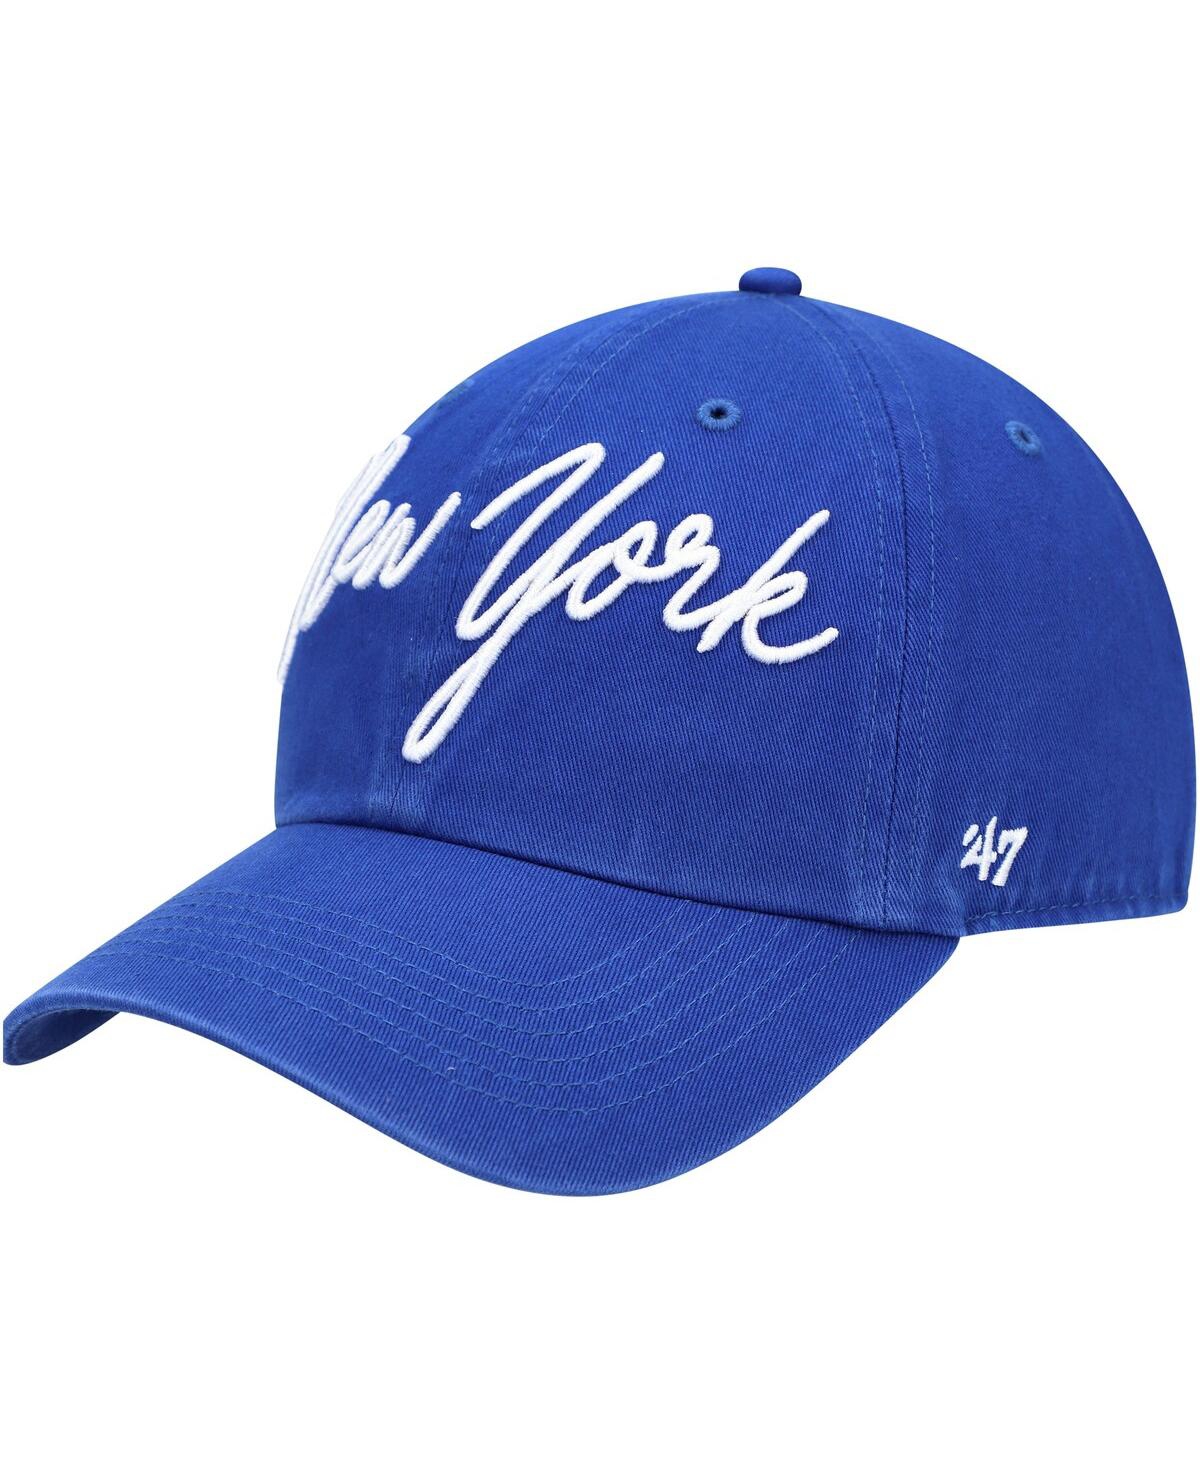 47 Brand Women's '47 Royal New York Giants Vocal Clean Up Adjustable Hat